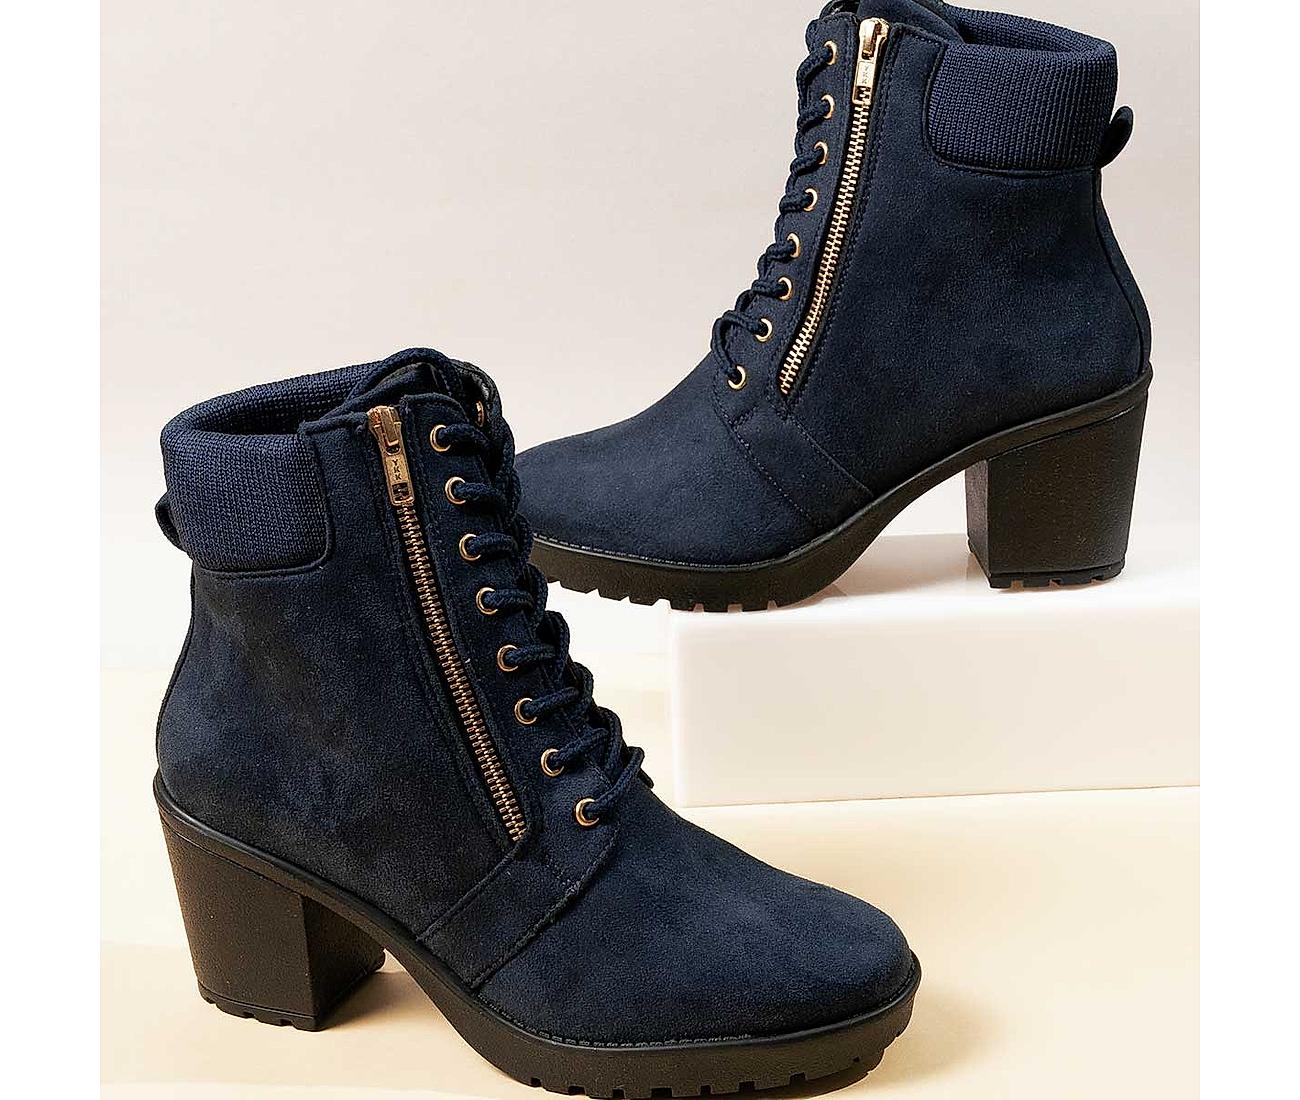 Navy Blue Faux Suede Ankle Boots | High heel boots ankle, Faux suede, Shoes  women heels